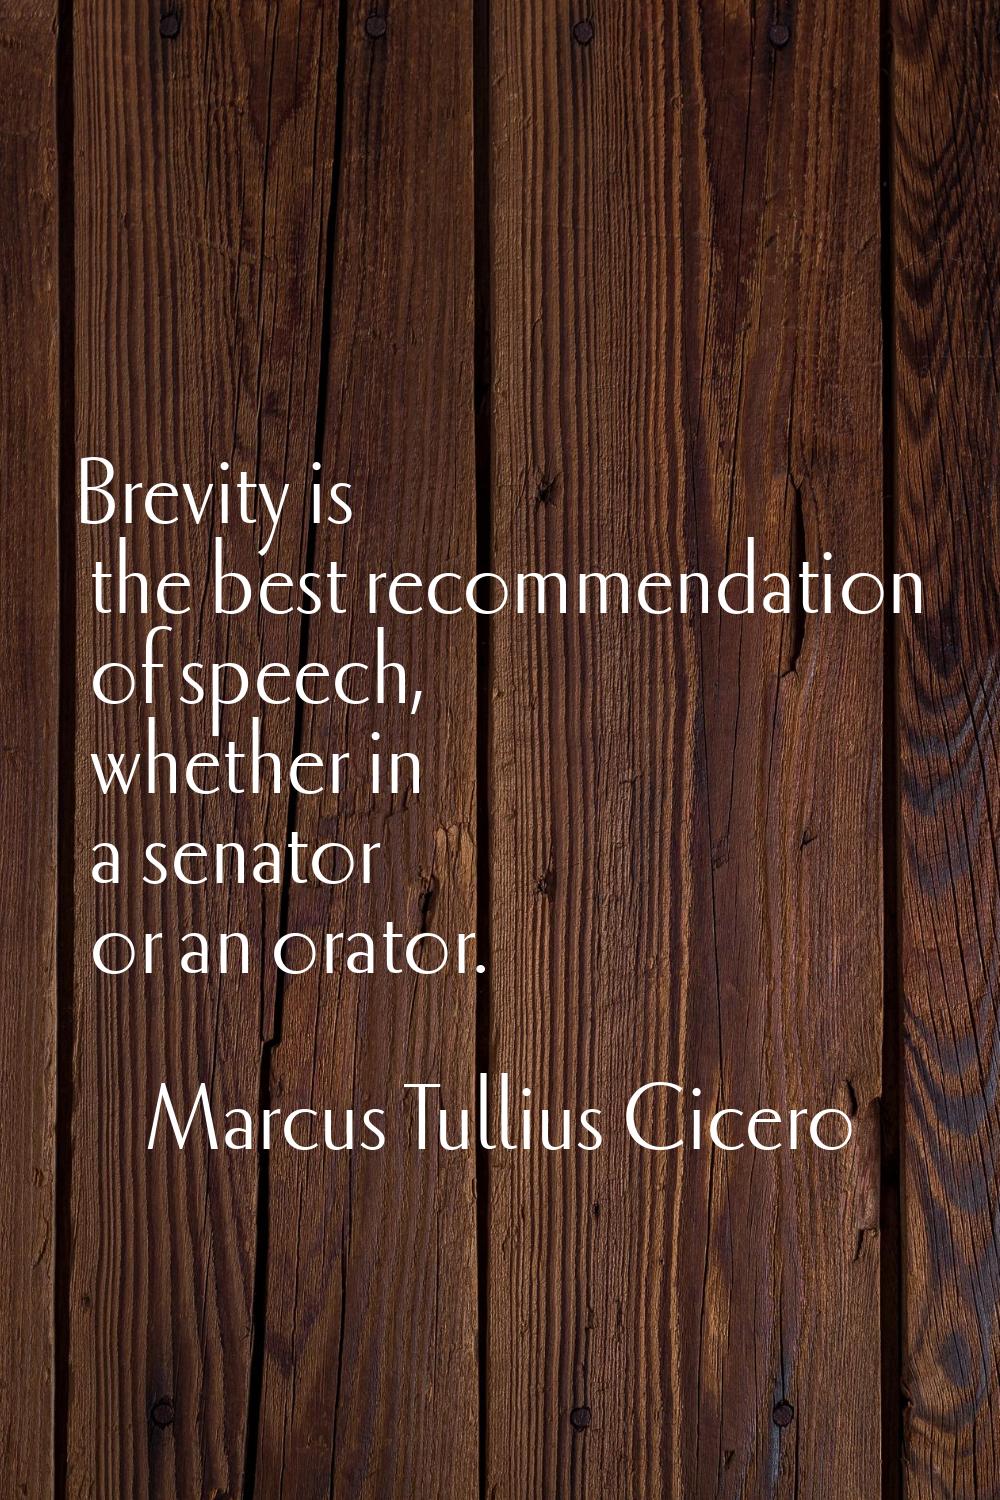 Brevity is the best recommendation of speech, whether in a senator or an orator.